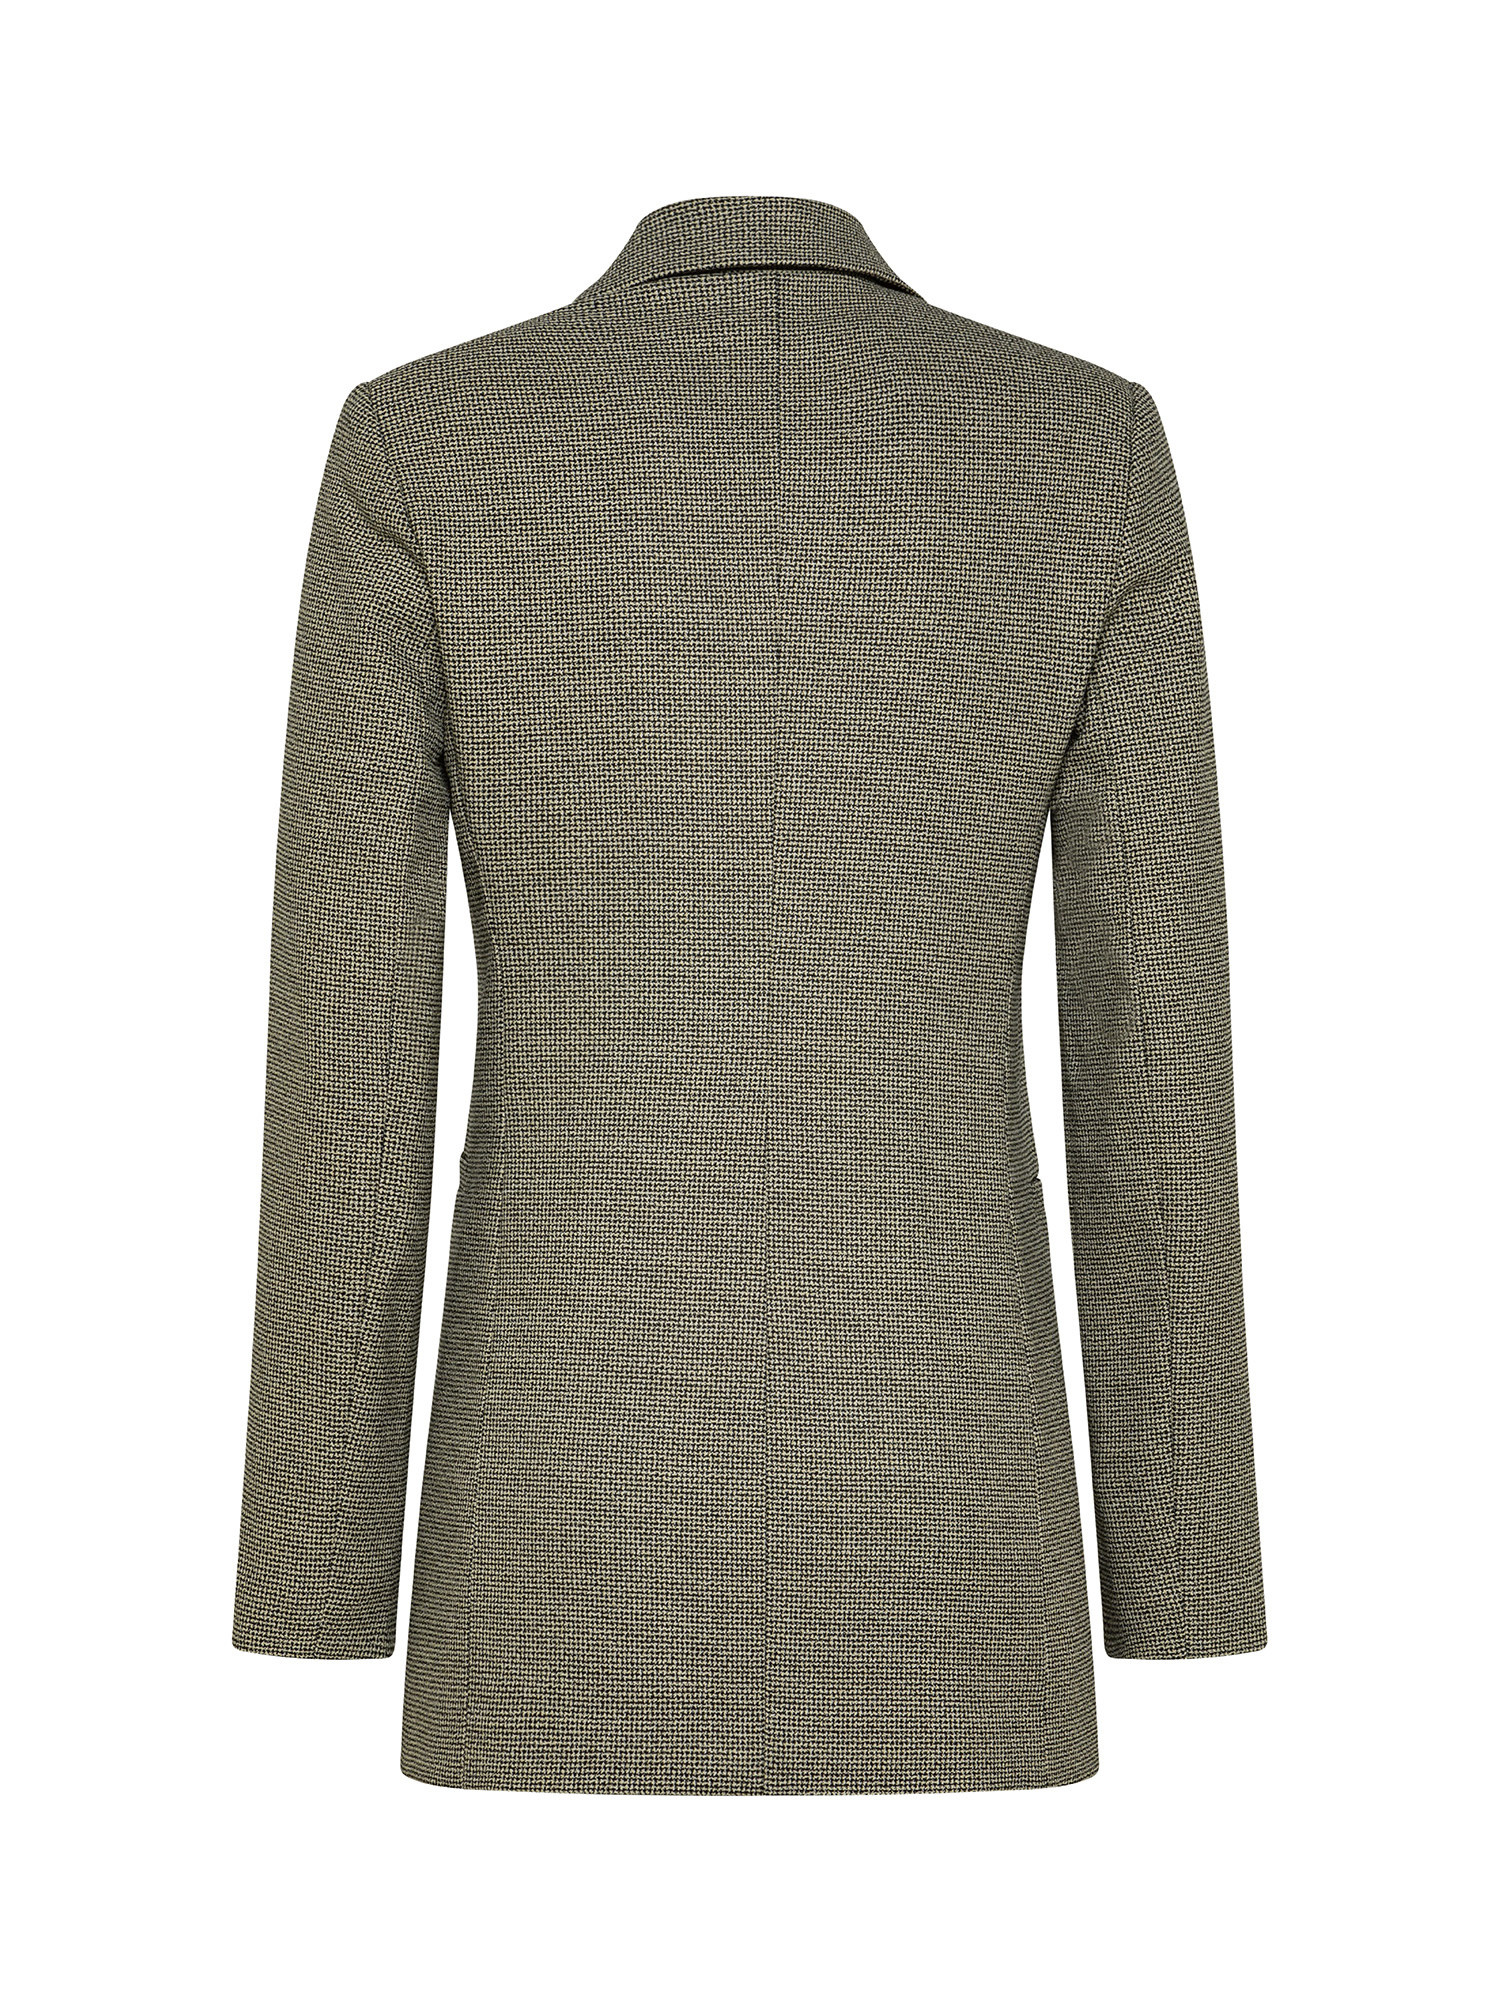 Options - Double-breasted blazer, Grey, large image number 1